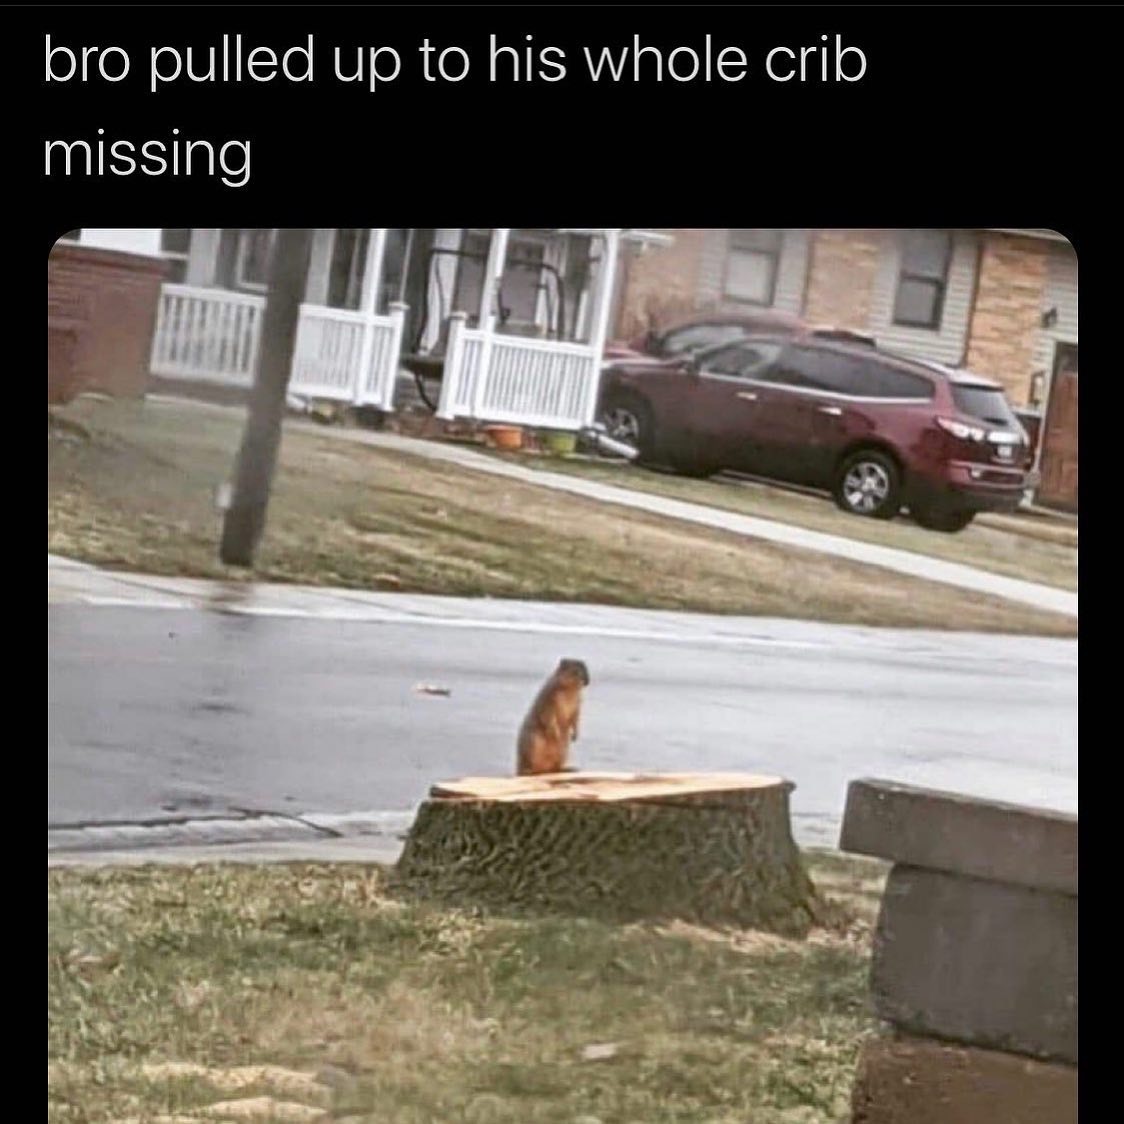 pet - bro pulled up to his whole crib missing